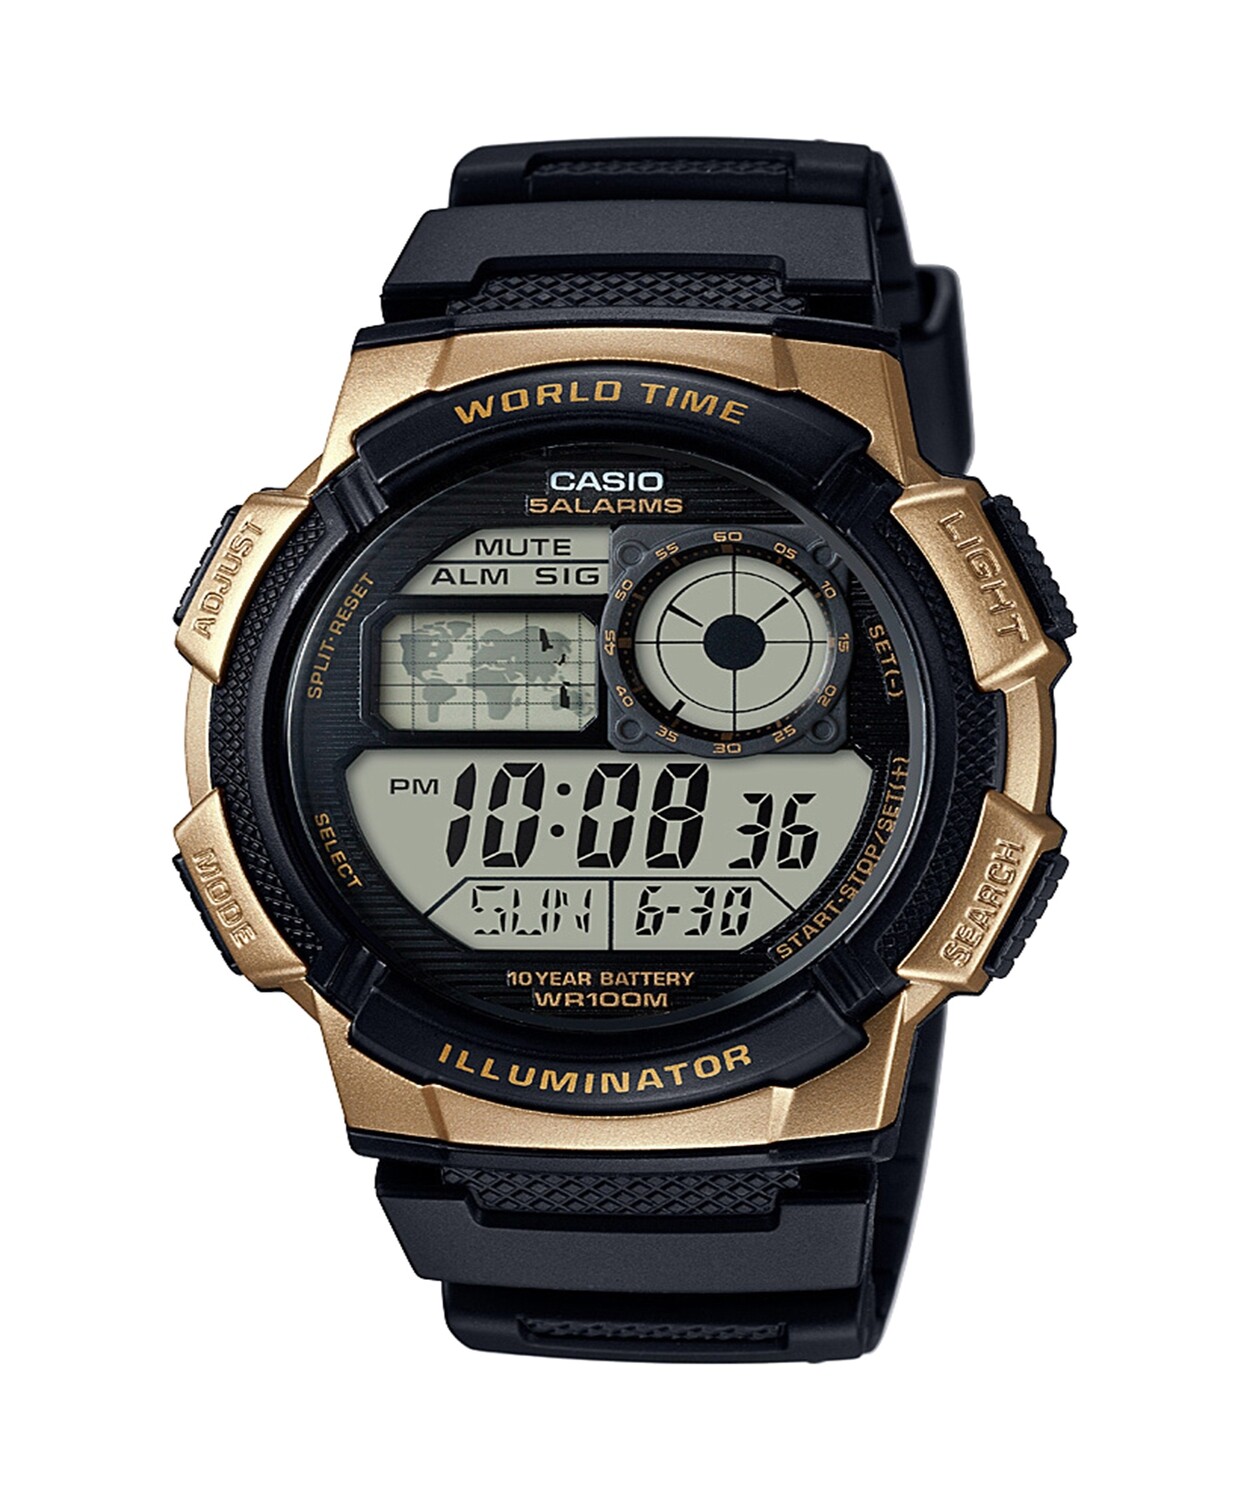 Casio Men's '10 Year Battery' Quartz Stainless Steel and Resin Watch, Color Black (Model: AE-1000W-1A3VCF)